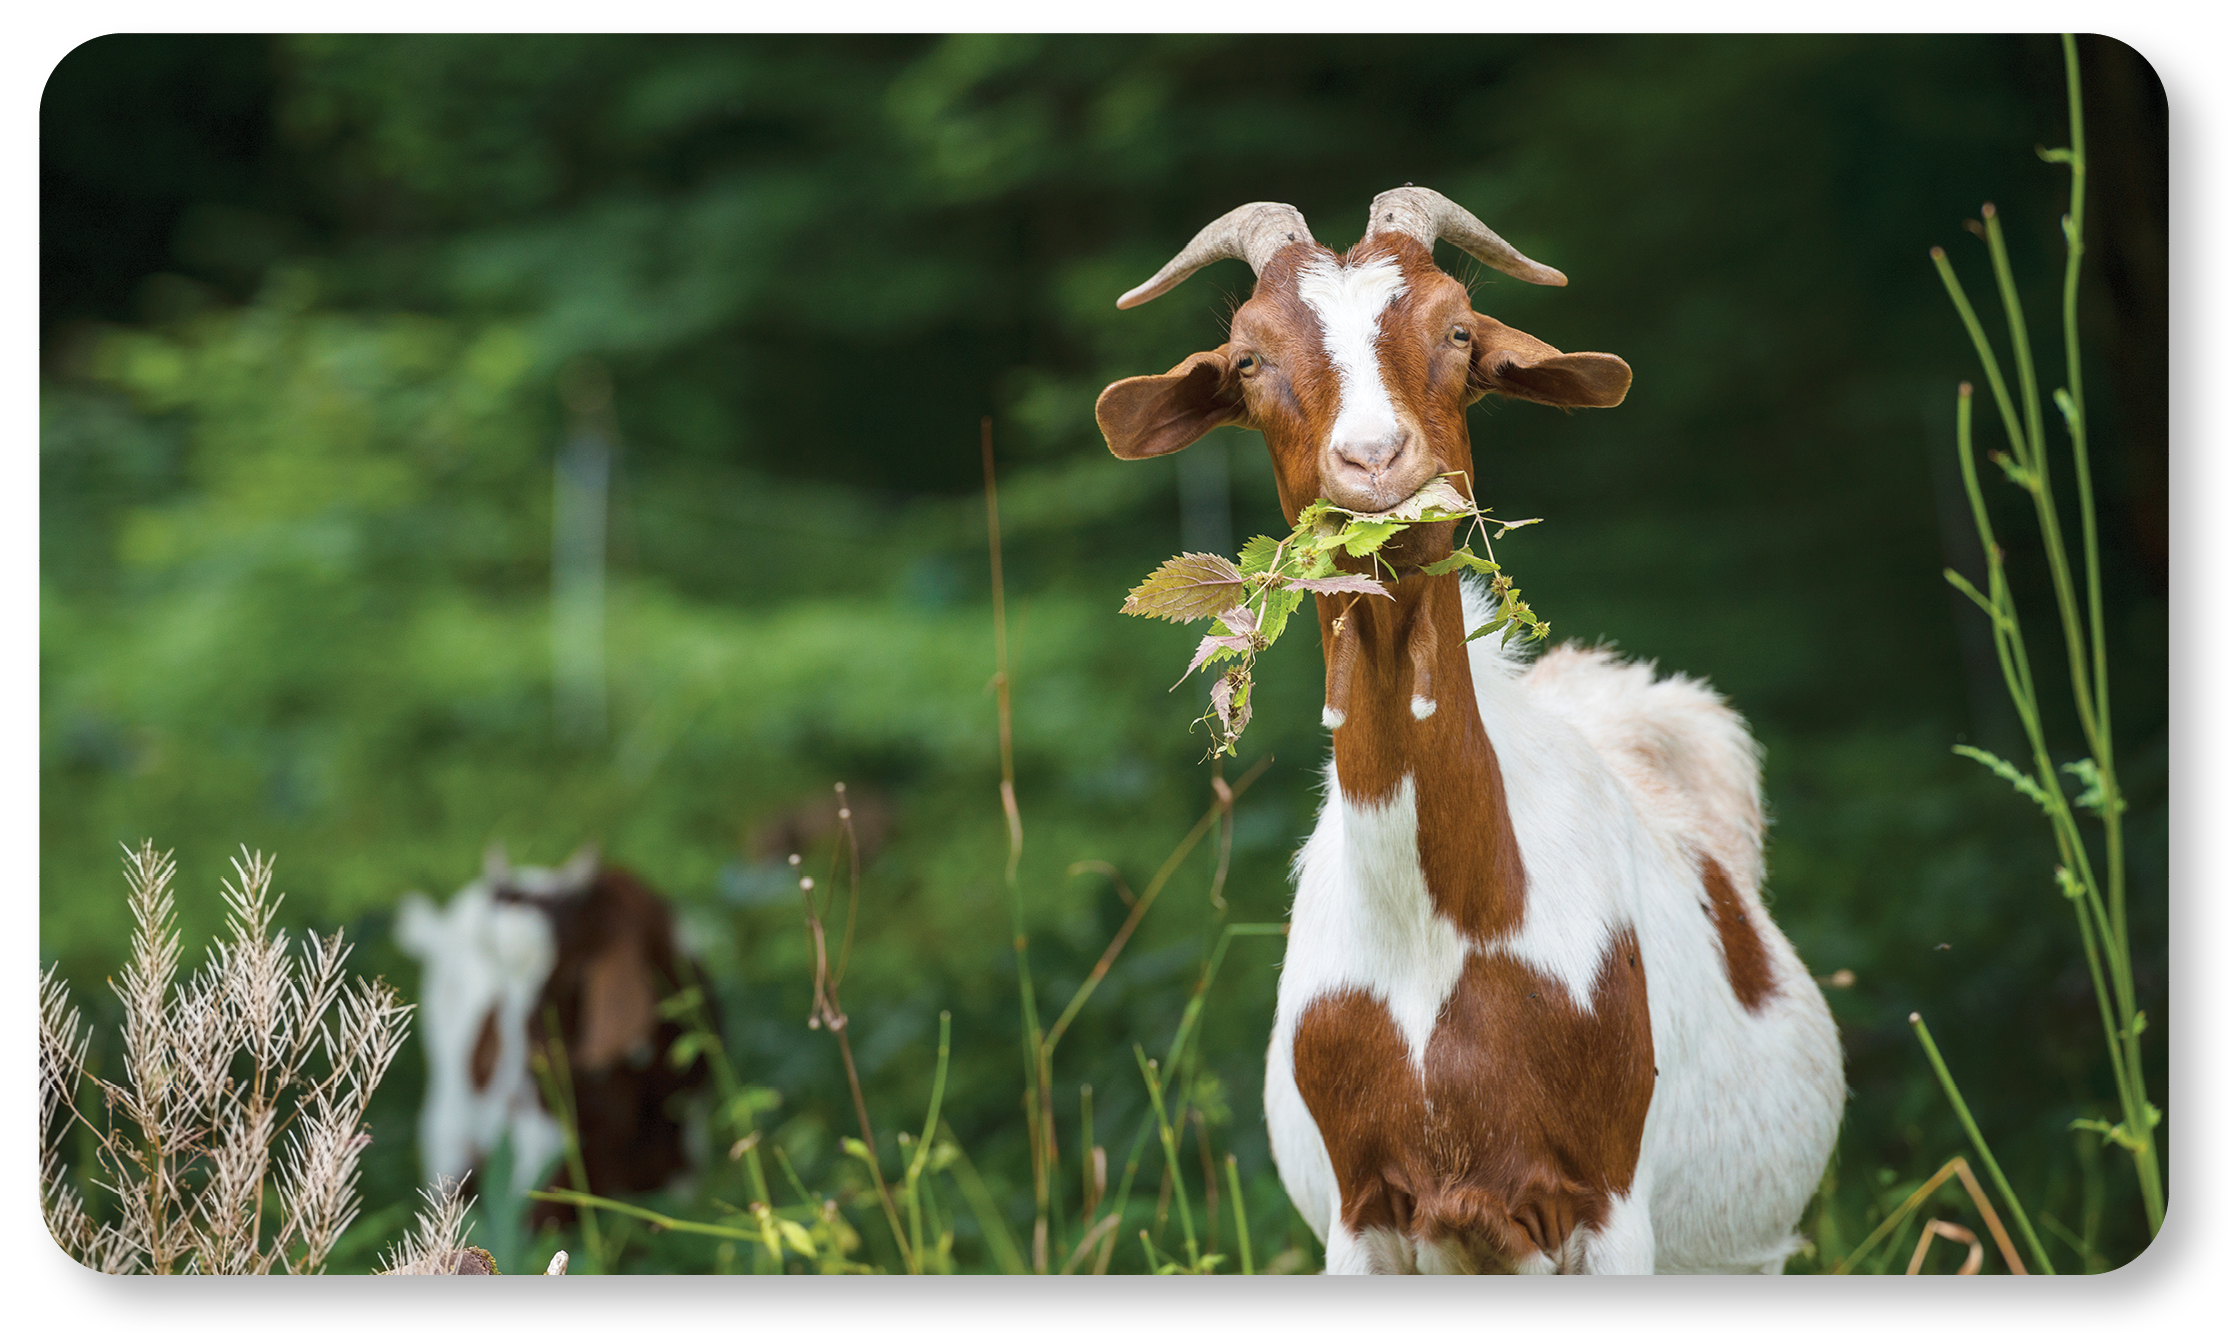 goat eating straw with green field background